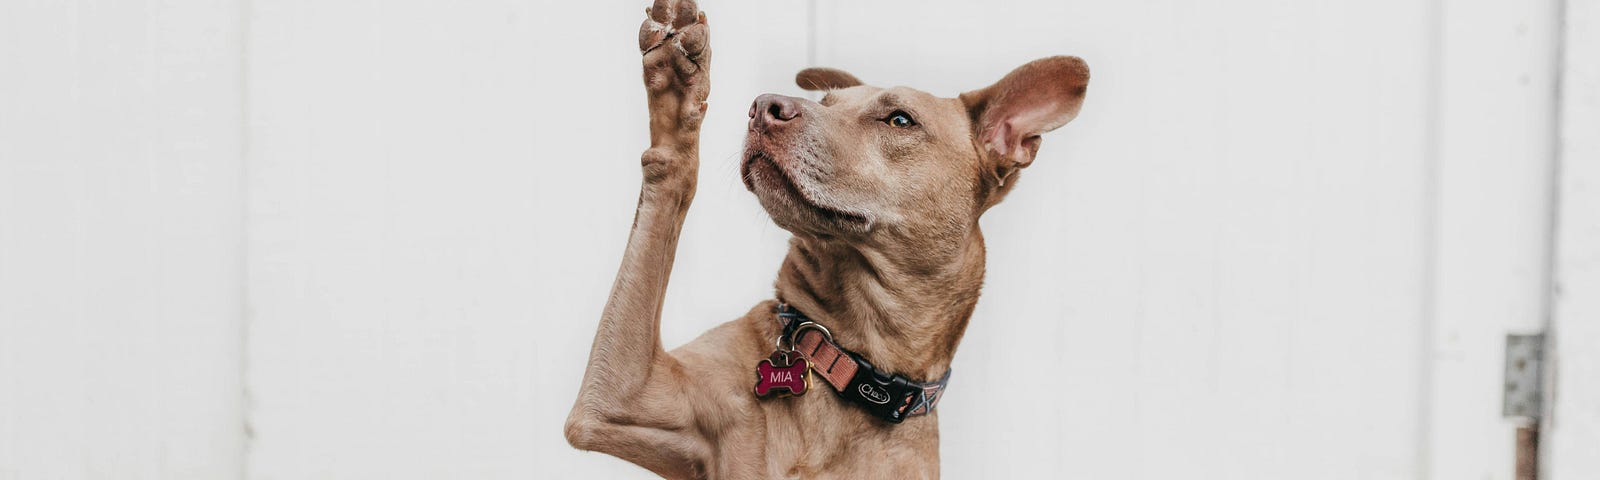 Dog raising a paw as if to ask a question.